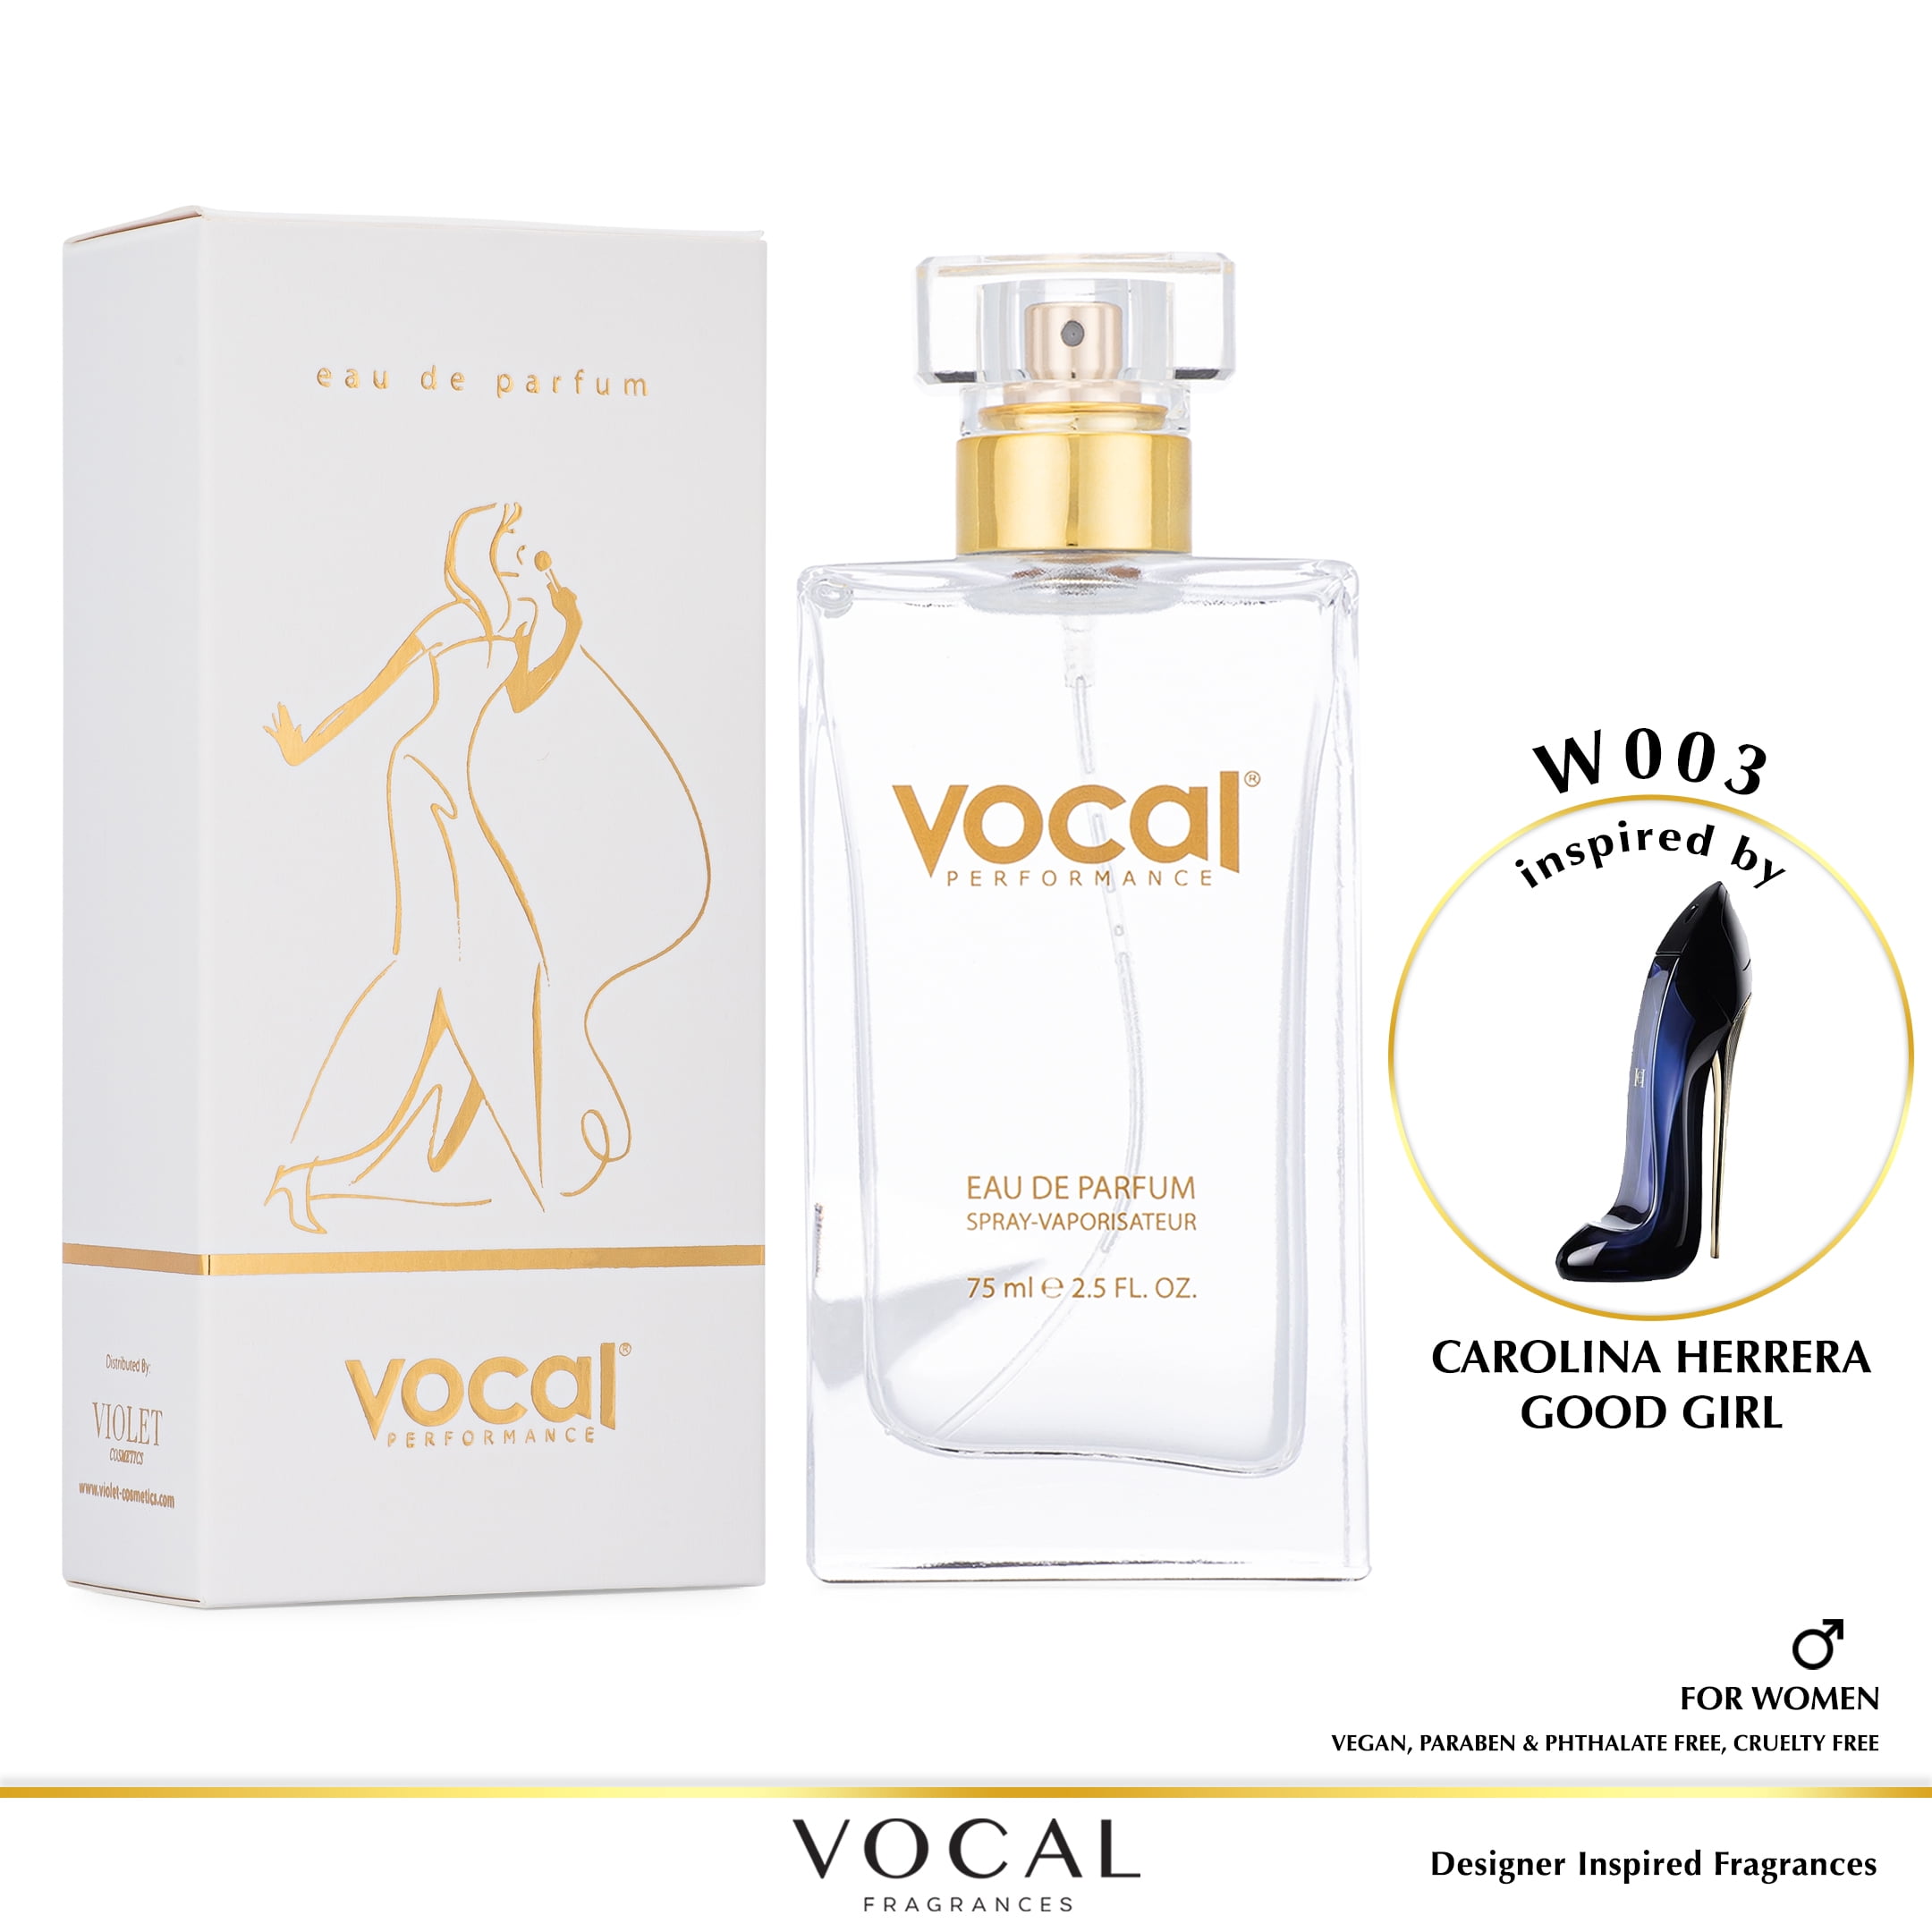 Vocal Fragrance Inspired by Chanel Chanel 5 Eau de Parfum for Women 2.5 fl. oz. 75 ml. Vegan, Paraben & Phthalate Free Never Tested on Animals